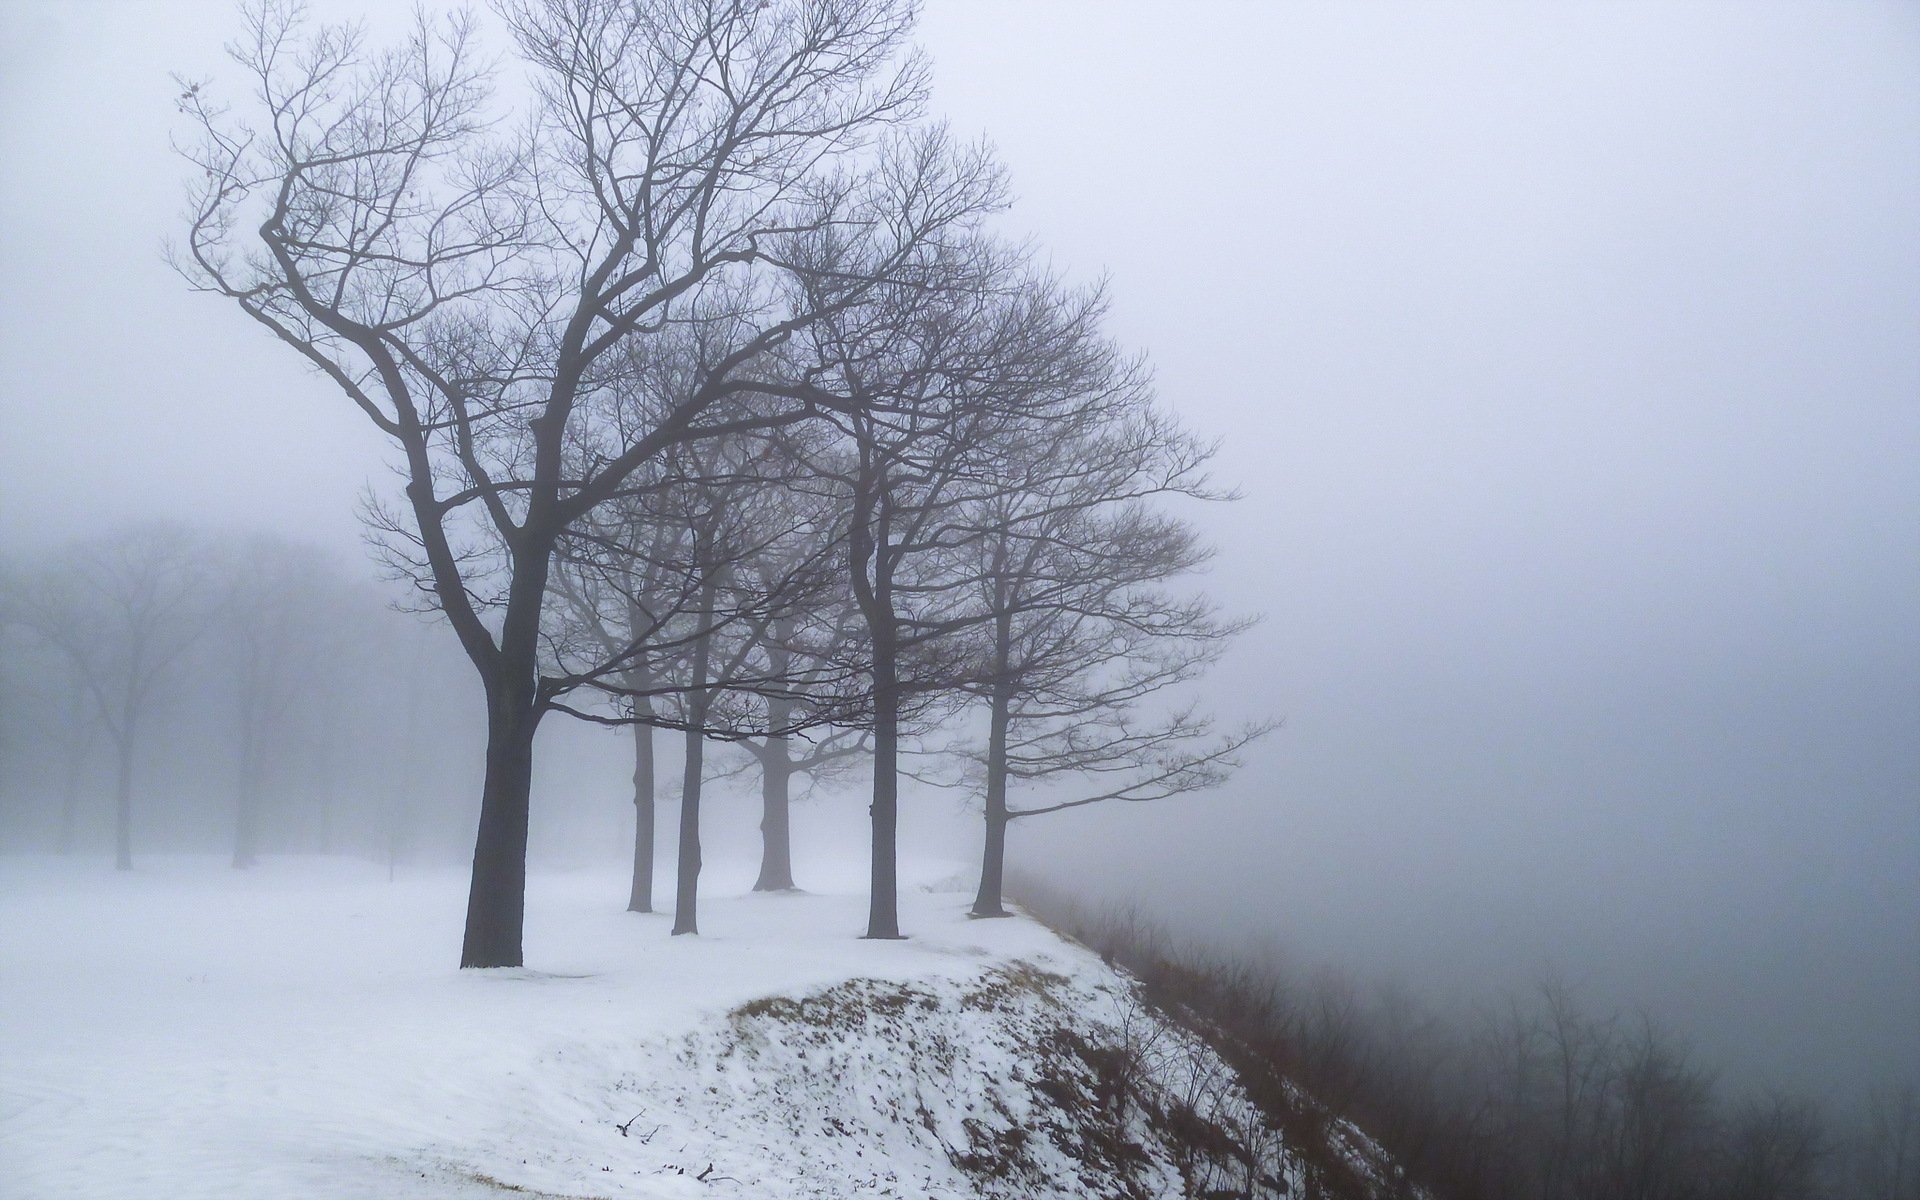 dry, Branches, Edge, Fog, Mountain, Nature, Snow, Snowstorm, Tree, Trees, Wind, Winter Wallpaper